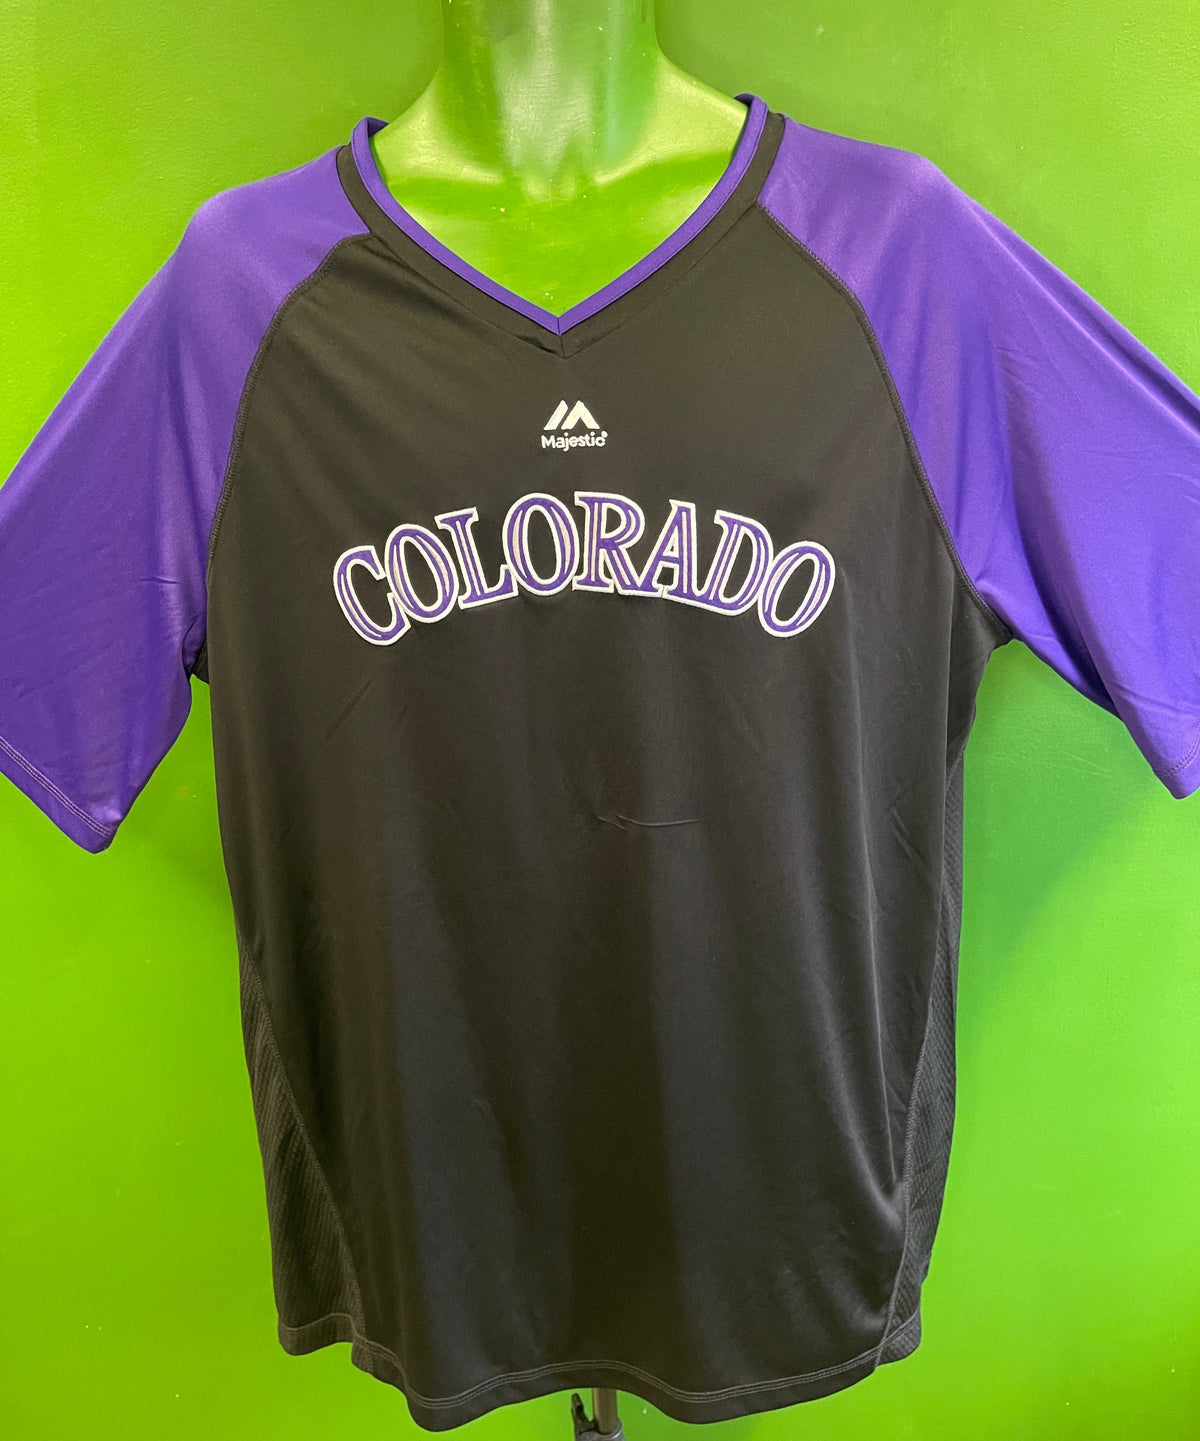 MLB Colorado Rockies Majestic Jersey Style Top Men's X-Large NWT